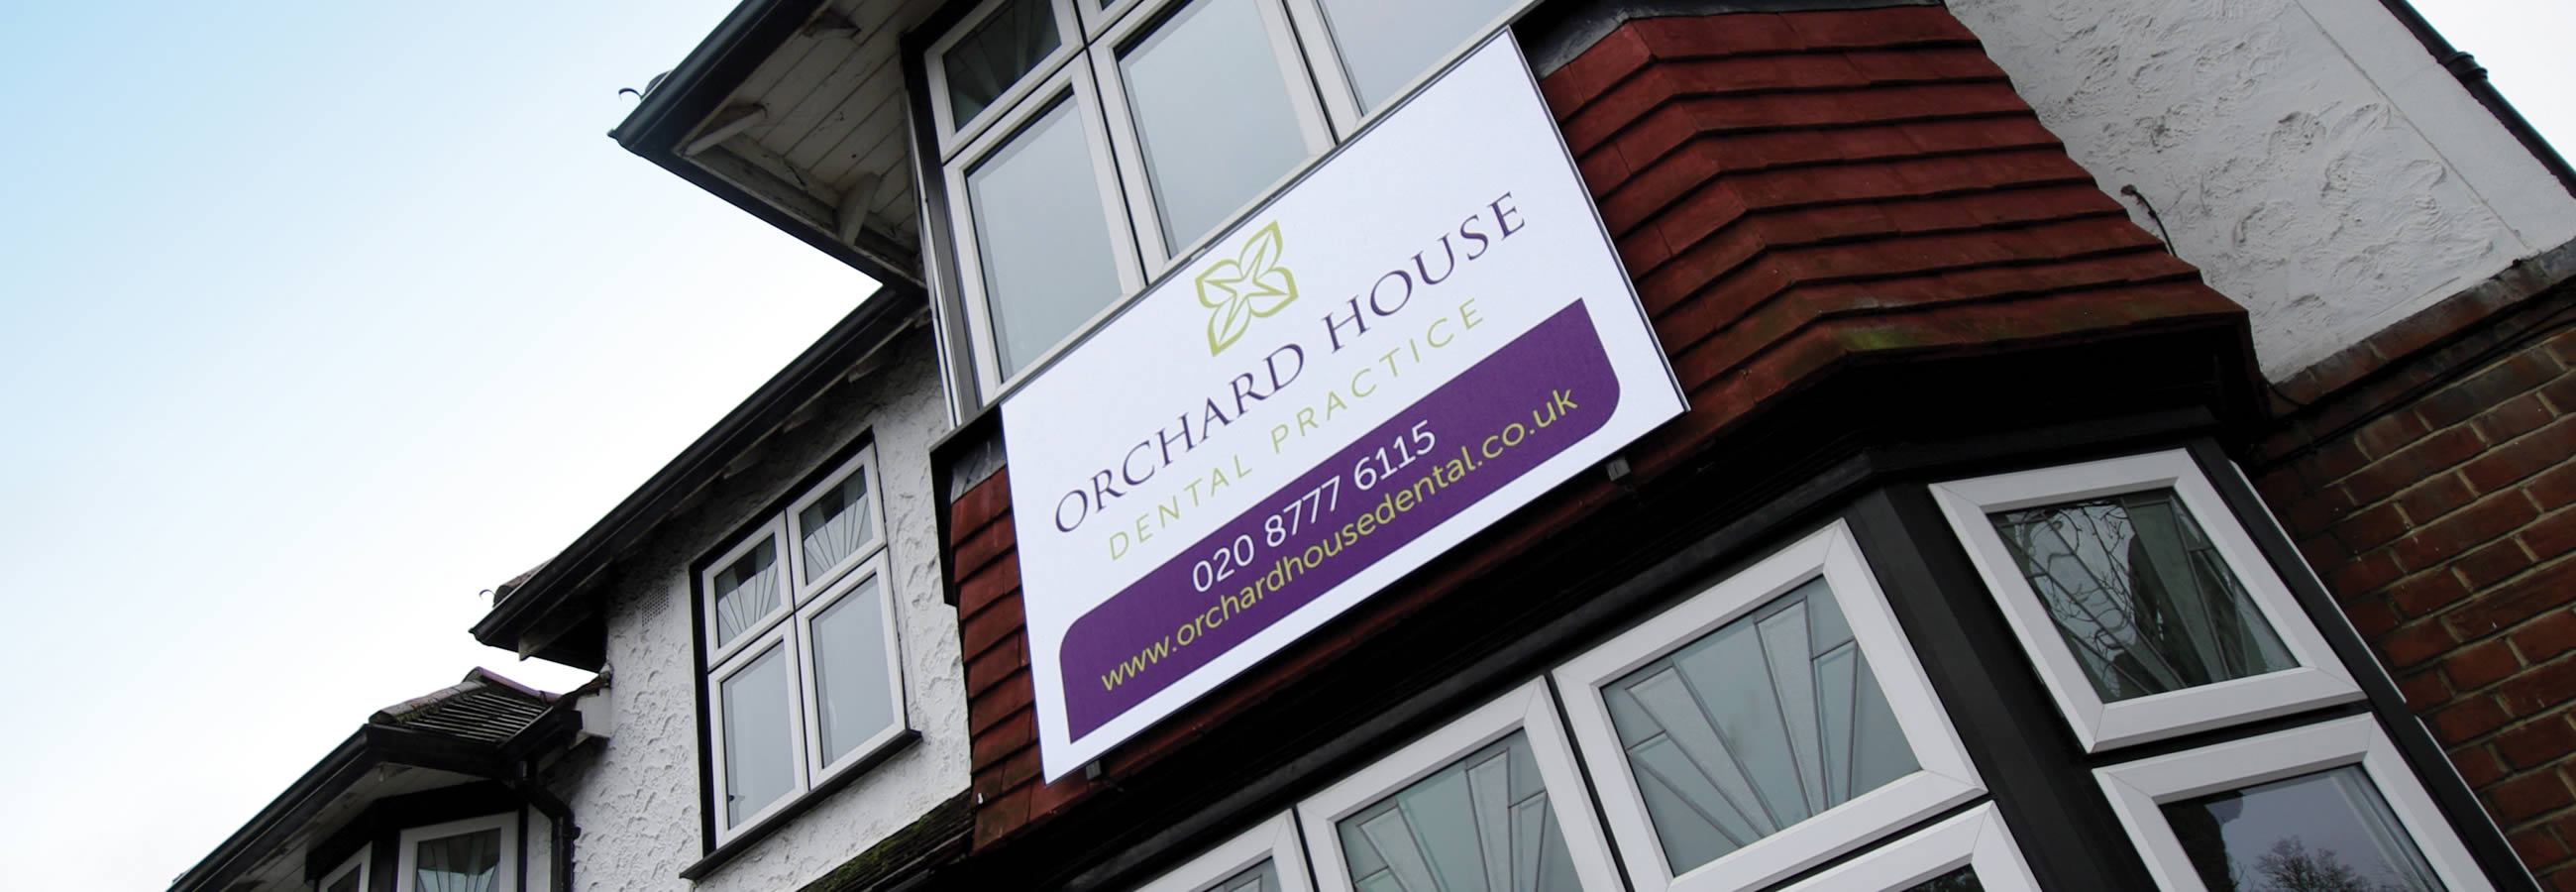 Contact Orchard House Dental Practice in Beckenham, Kent